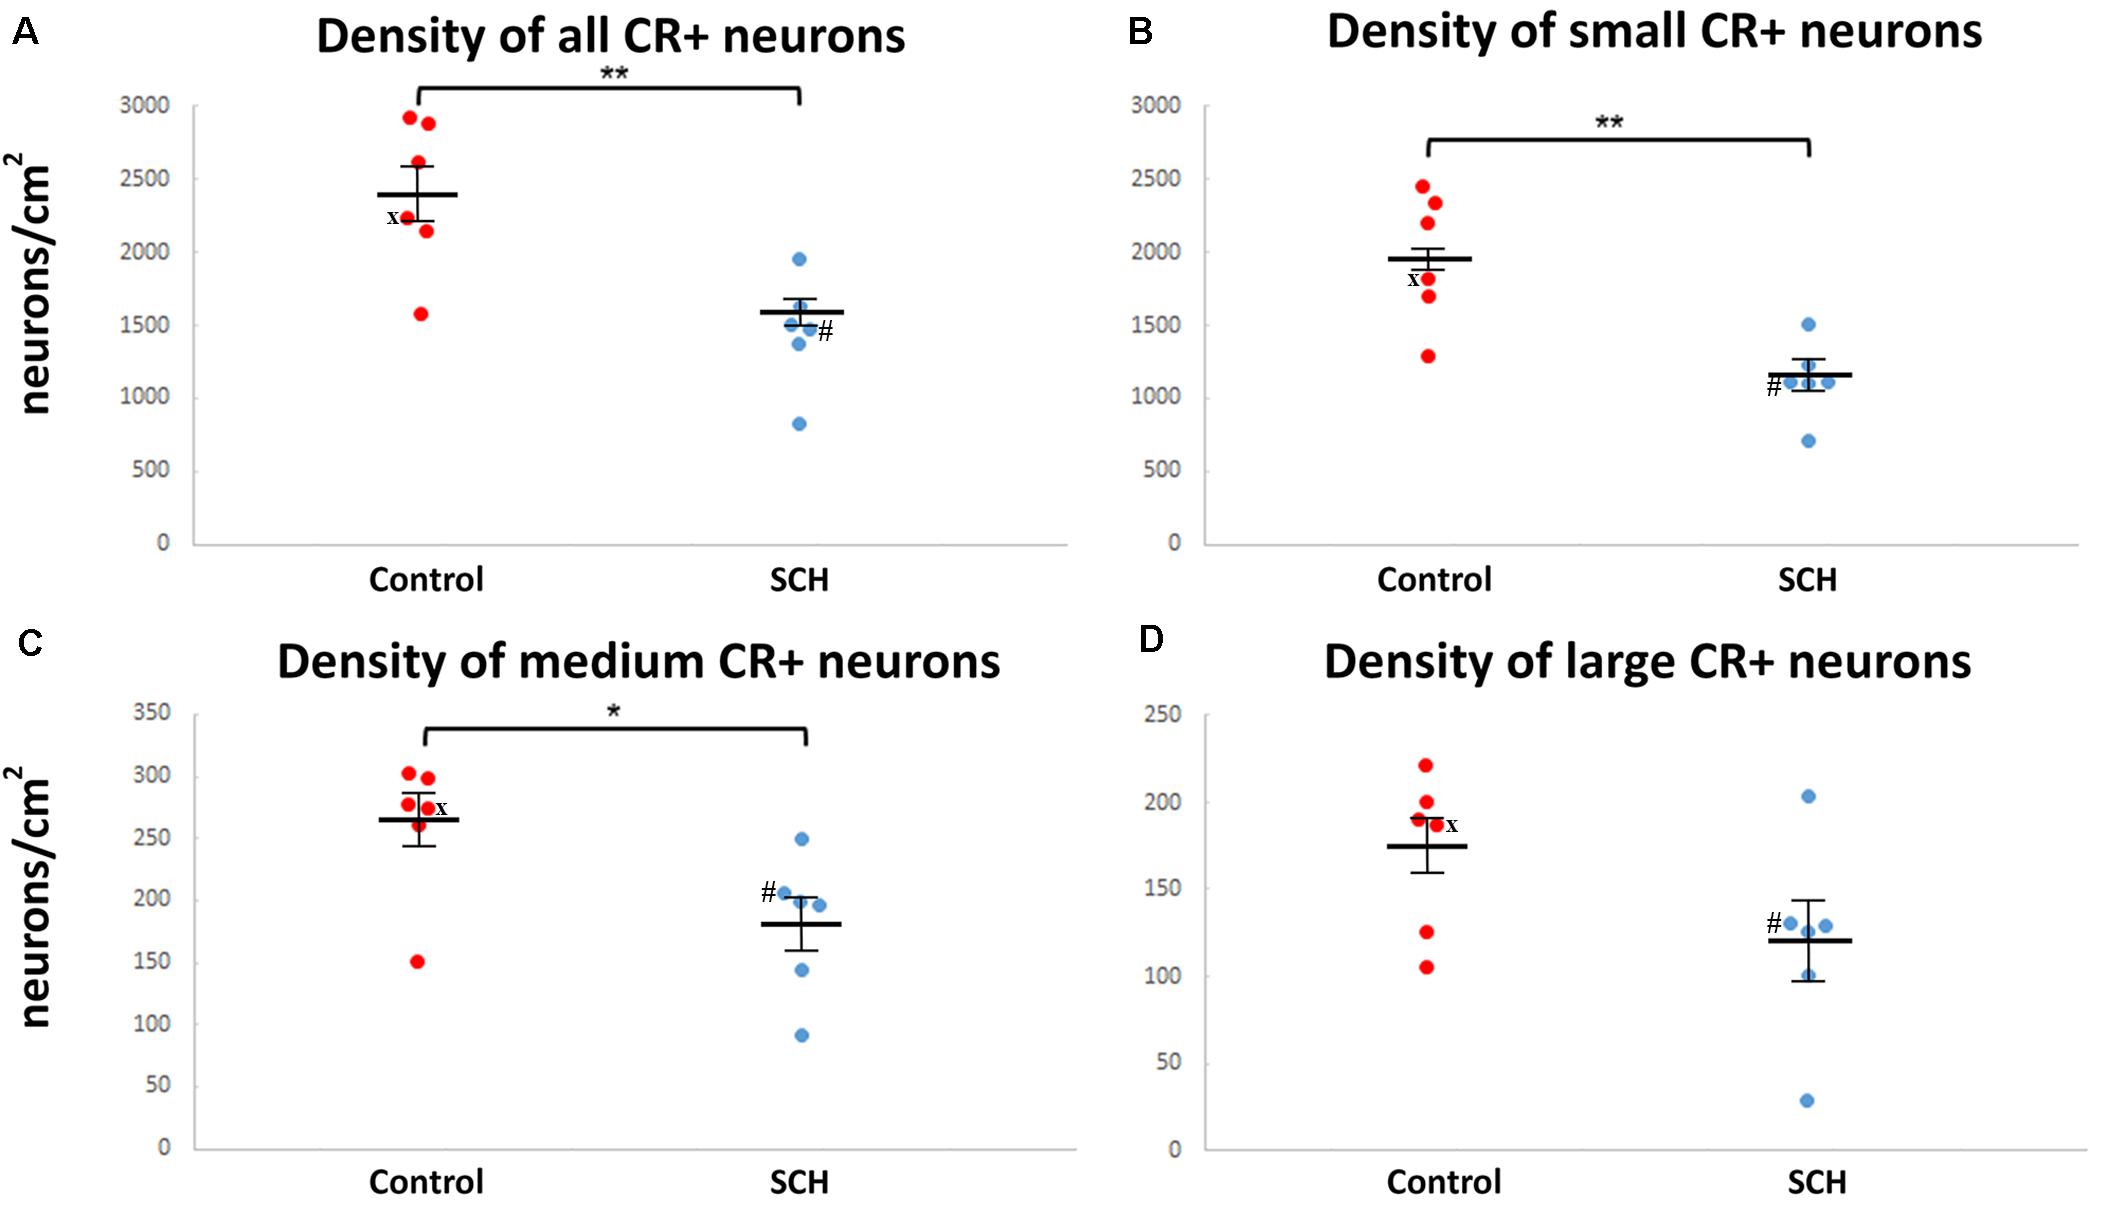 Frontiers Evidence For Decreased Density Of Calretinin Immunopositive Neurons In The Caudate Nucleus In Patients With Schizophrenia Frontiers In Neuroanatomy